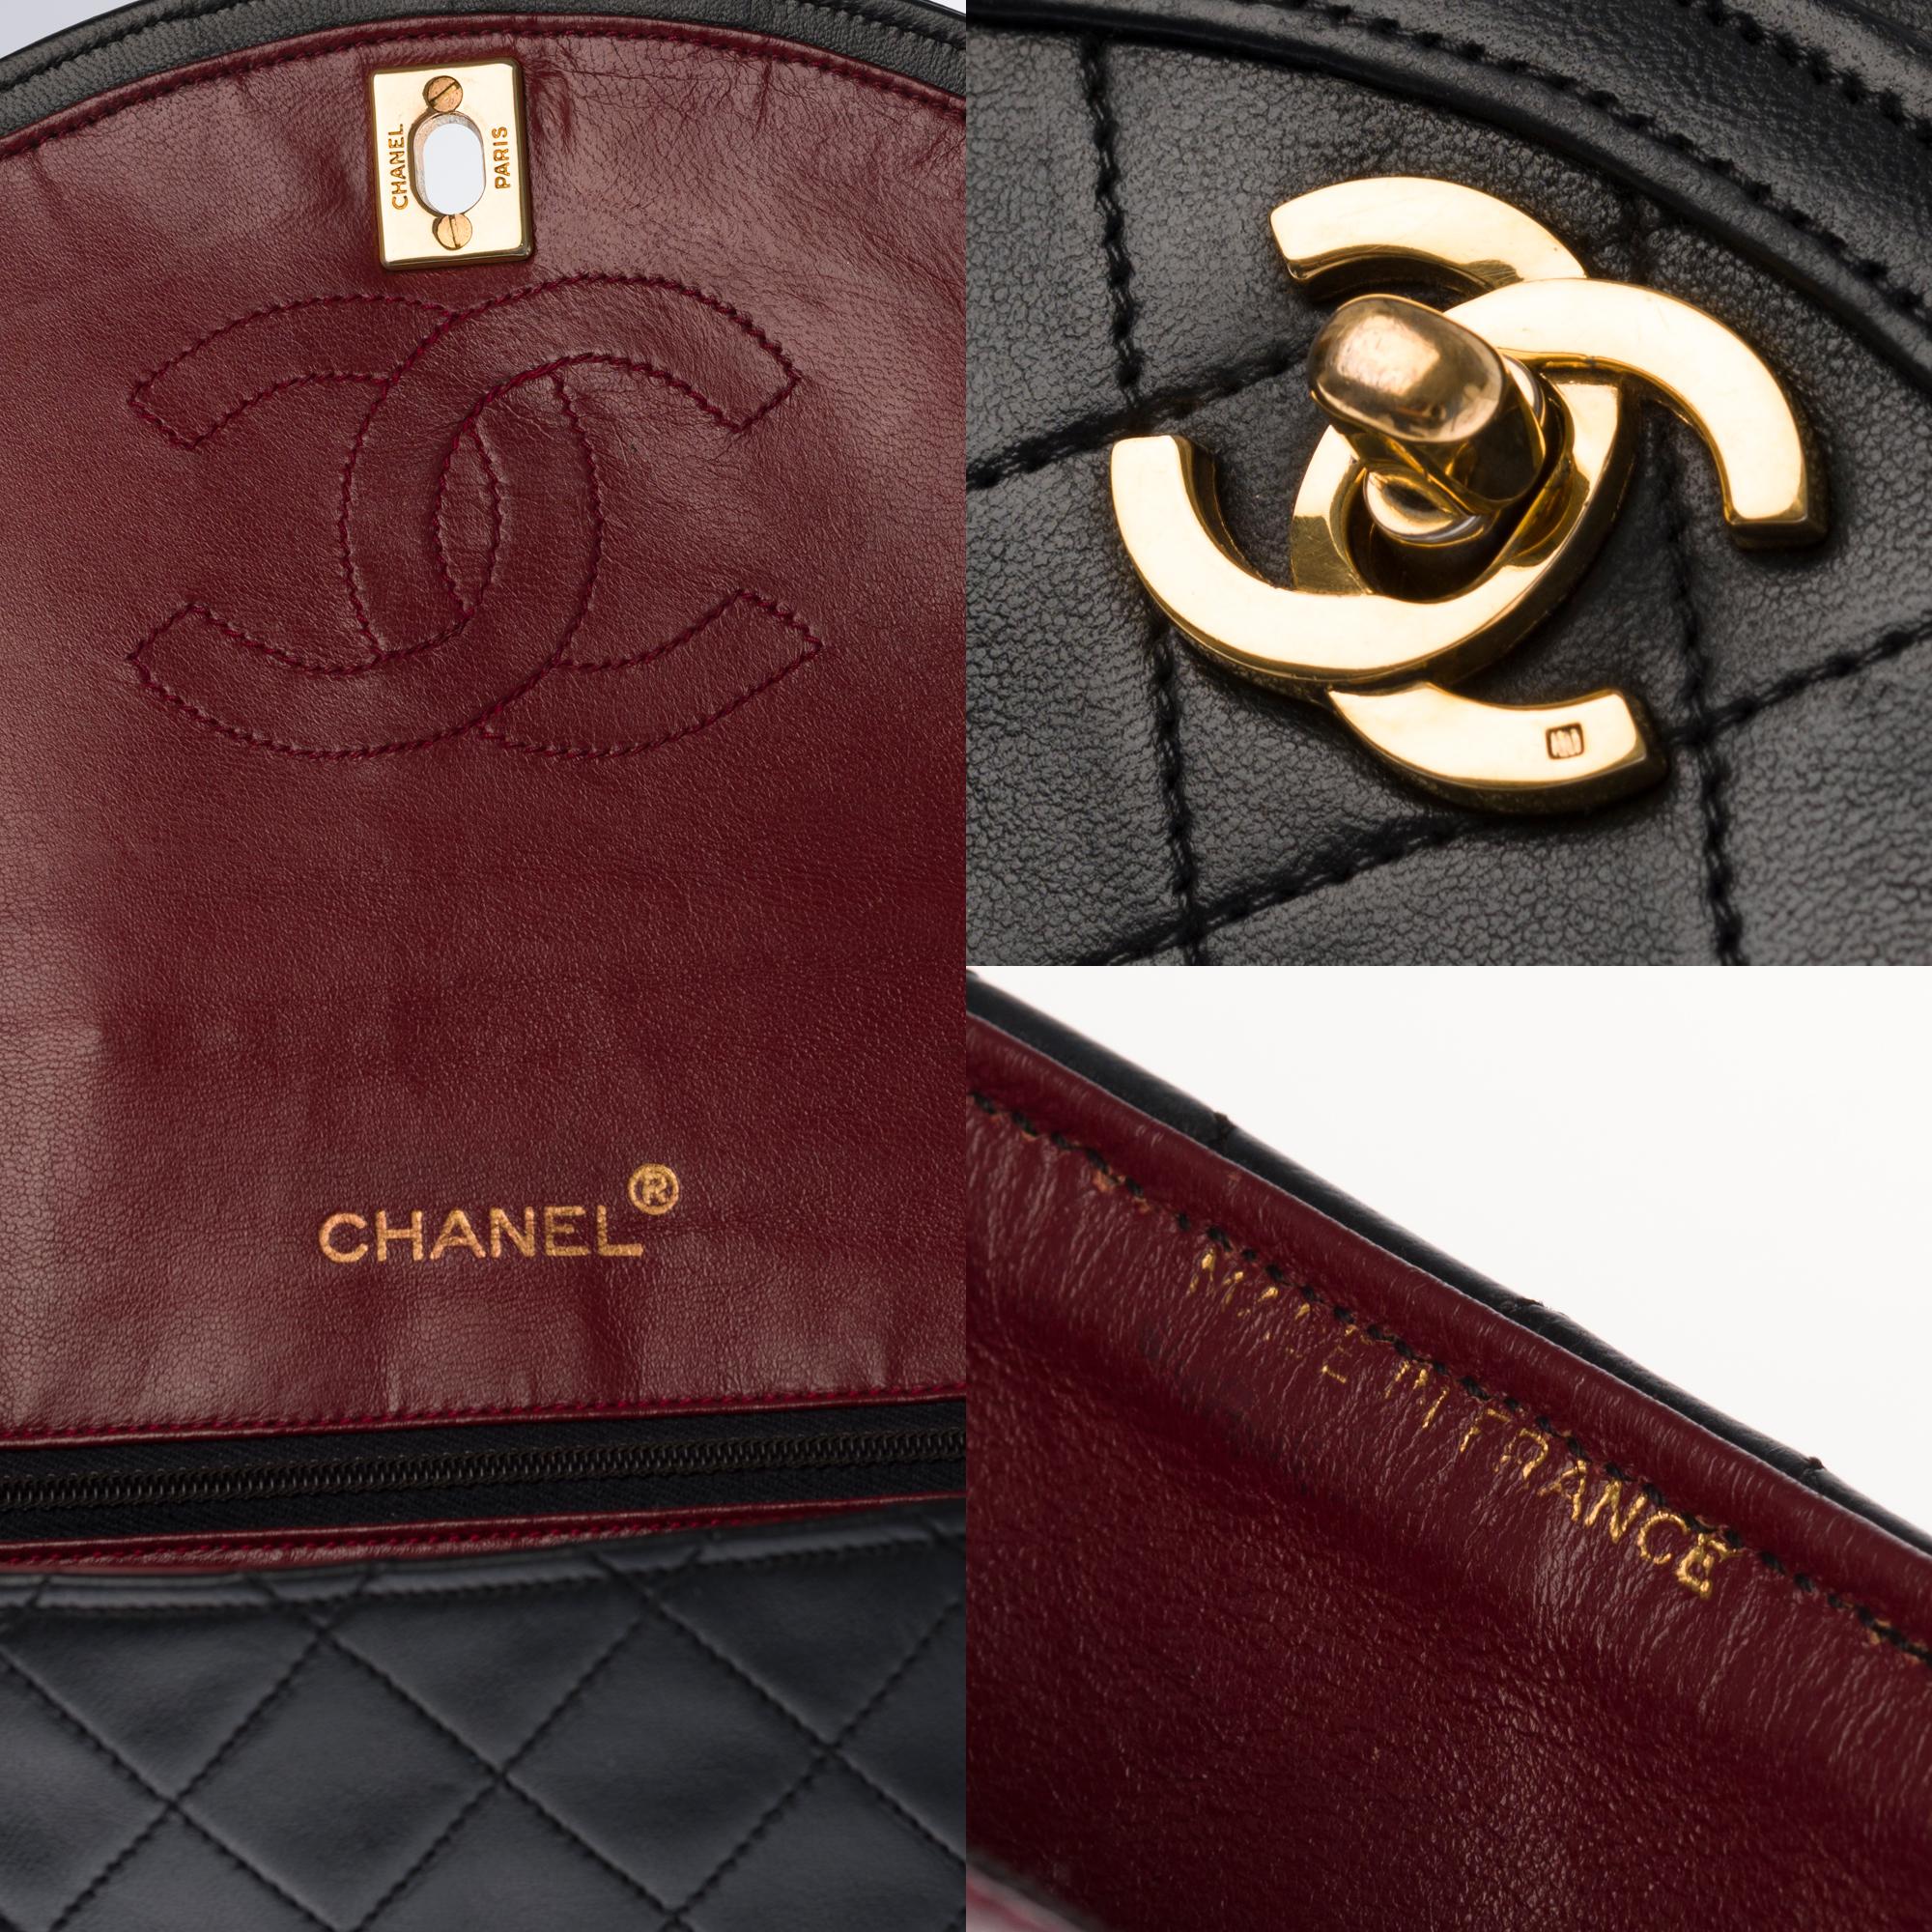 Women's Chanel Classic Shoulder bag in black quilted leather and gold hardware